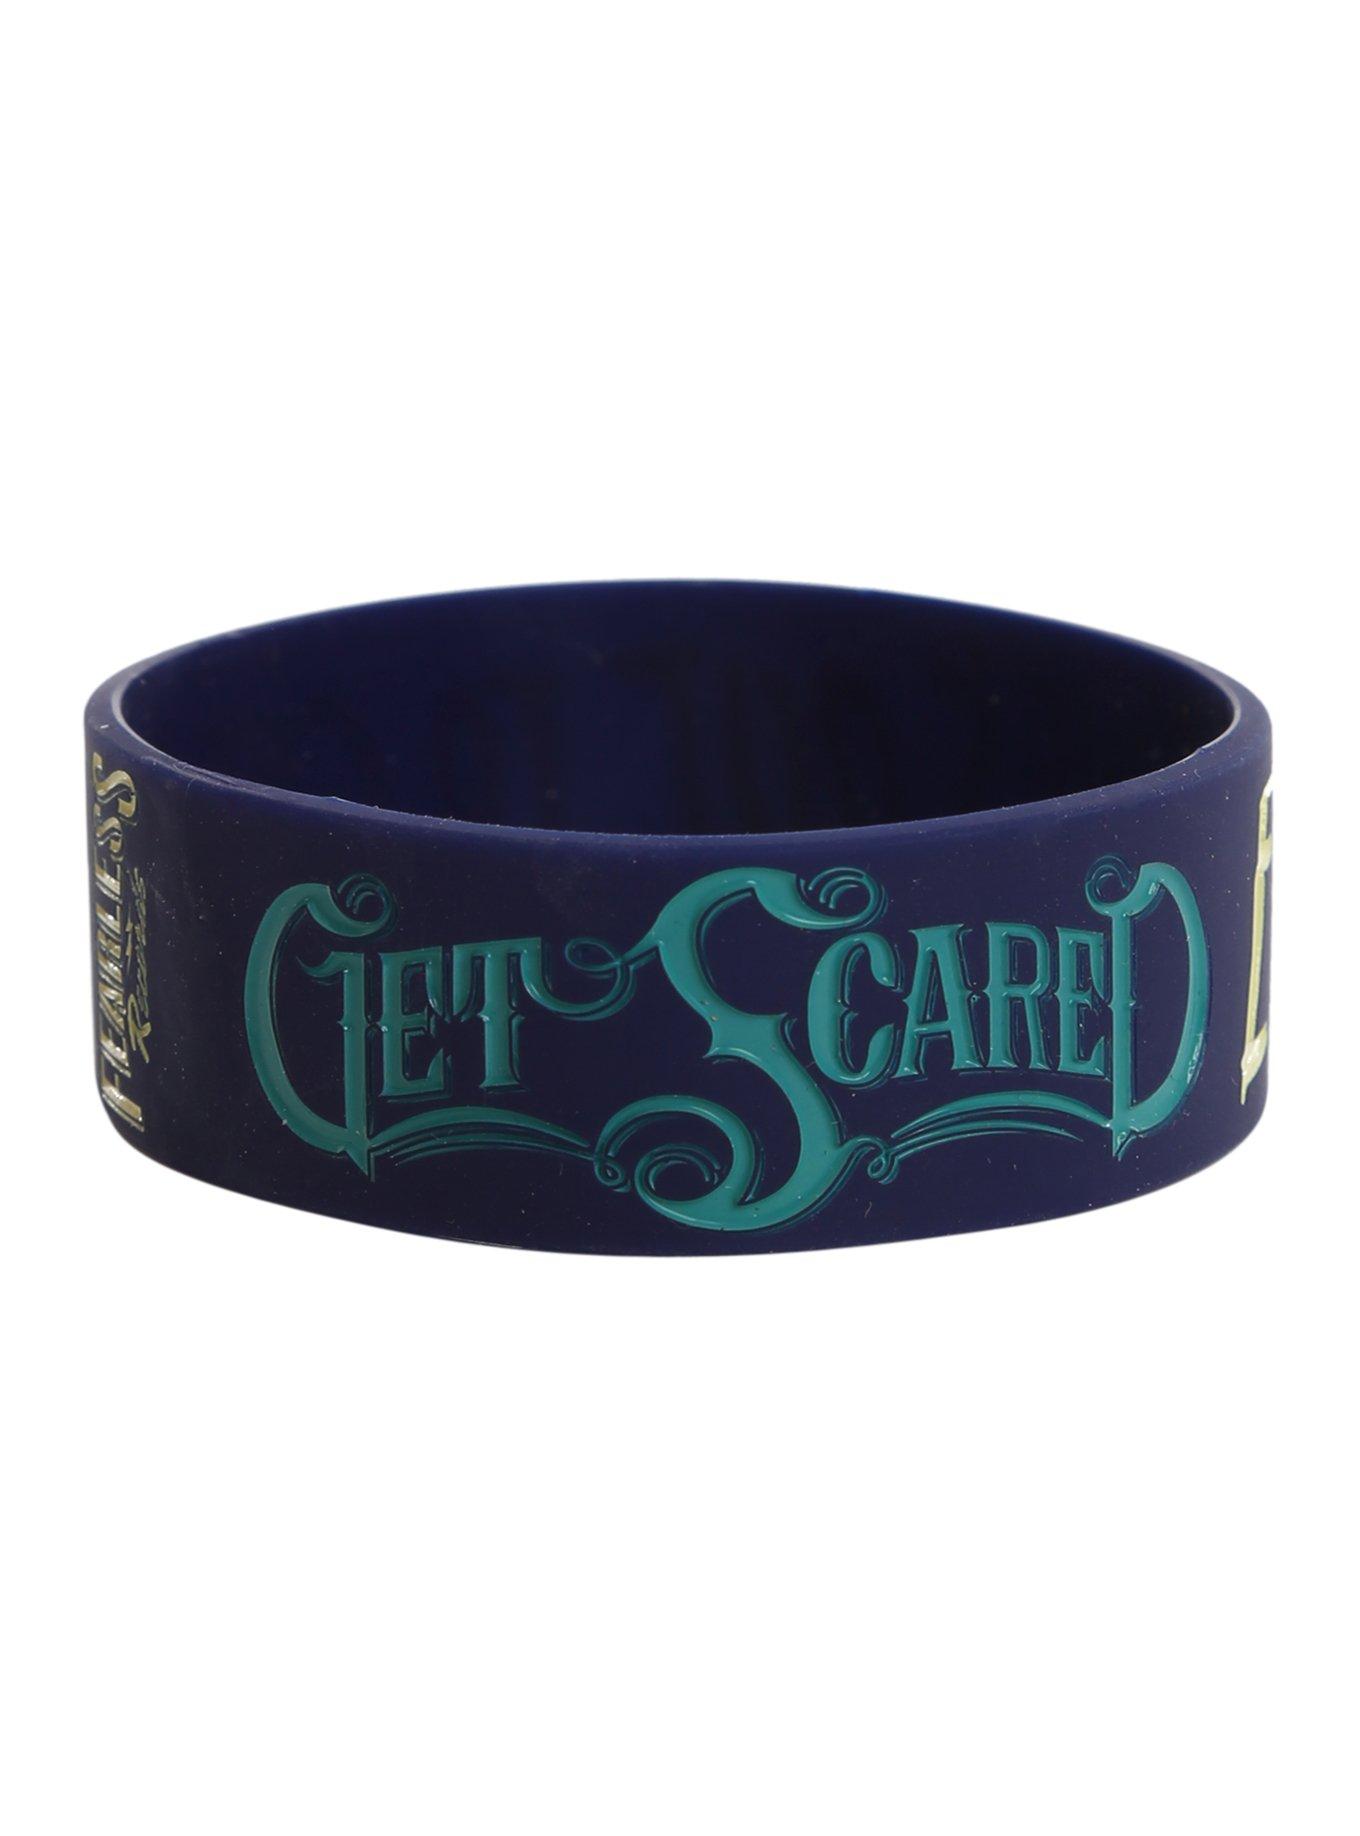 Get Scared Everyone's Out To Get Me Rubber Bracelet, , hi-res